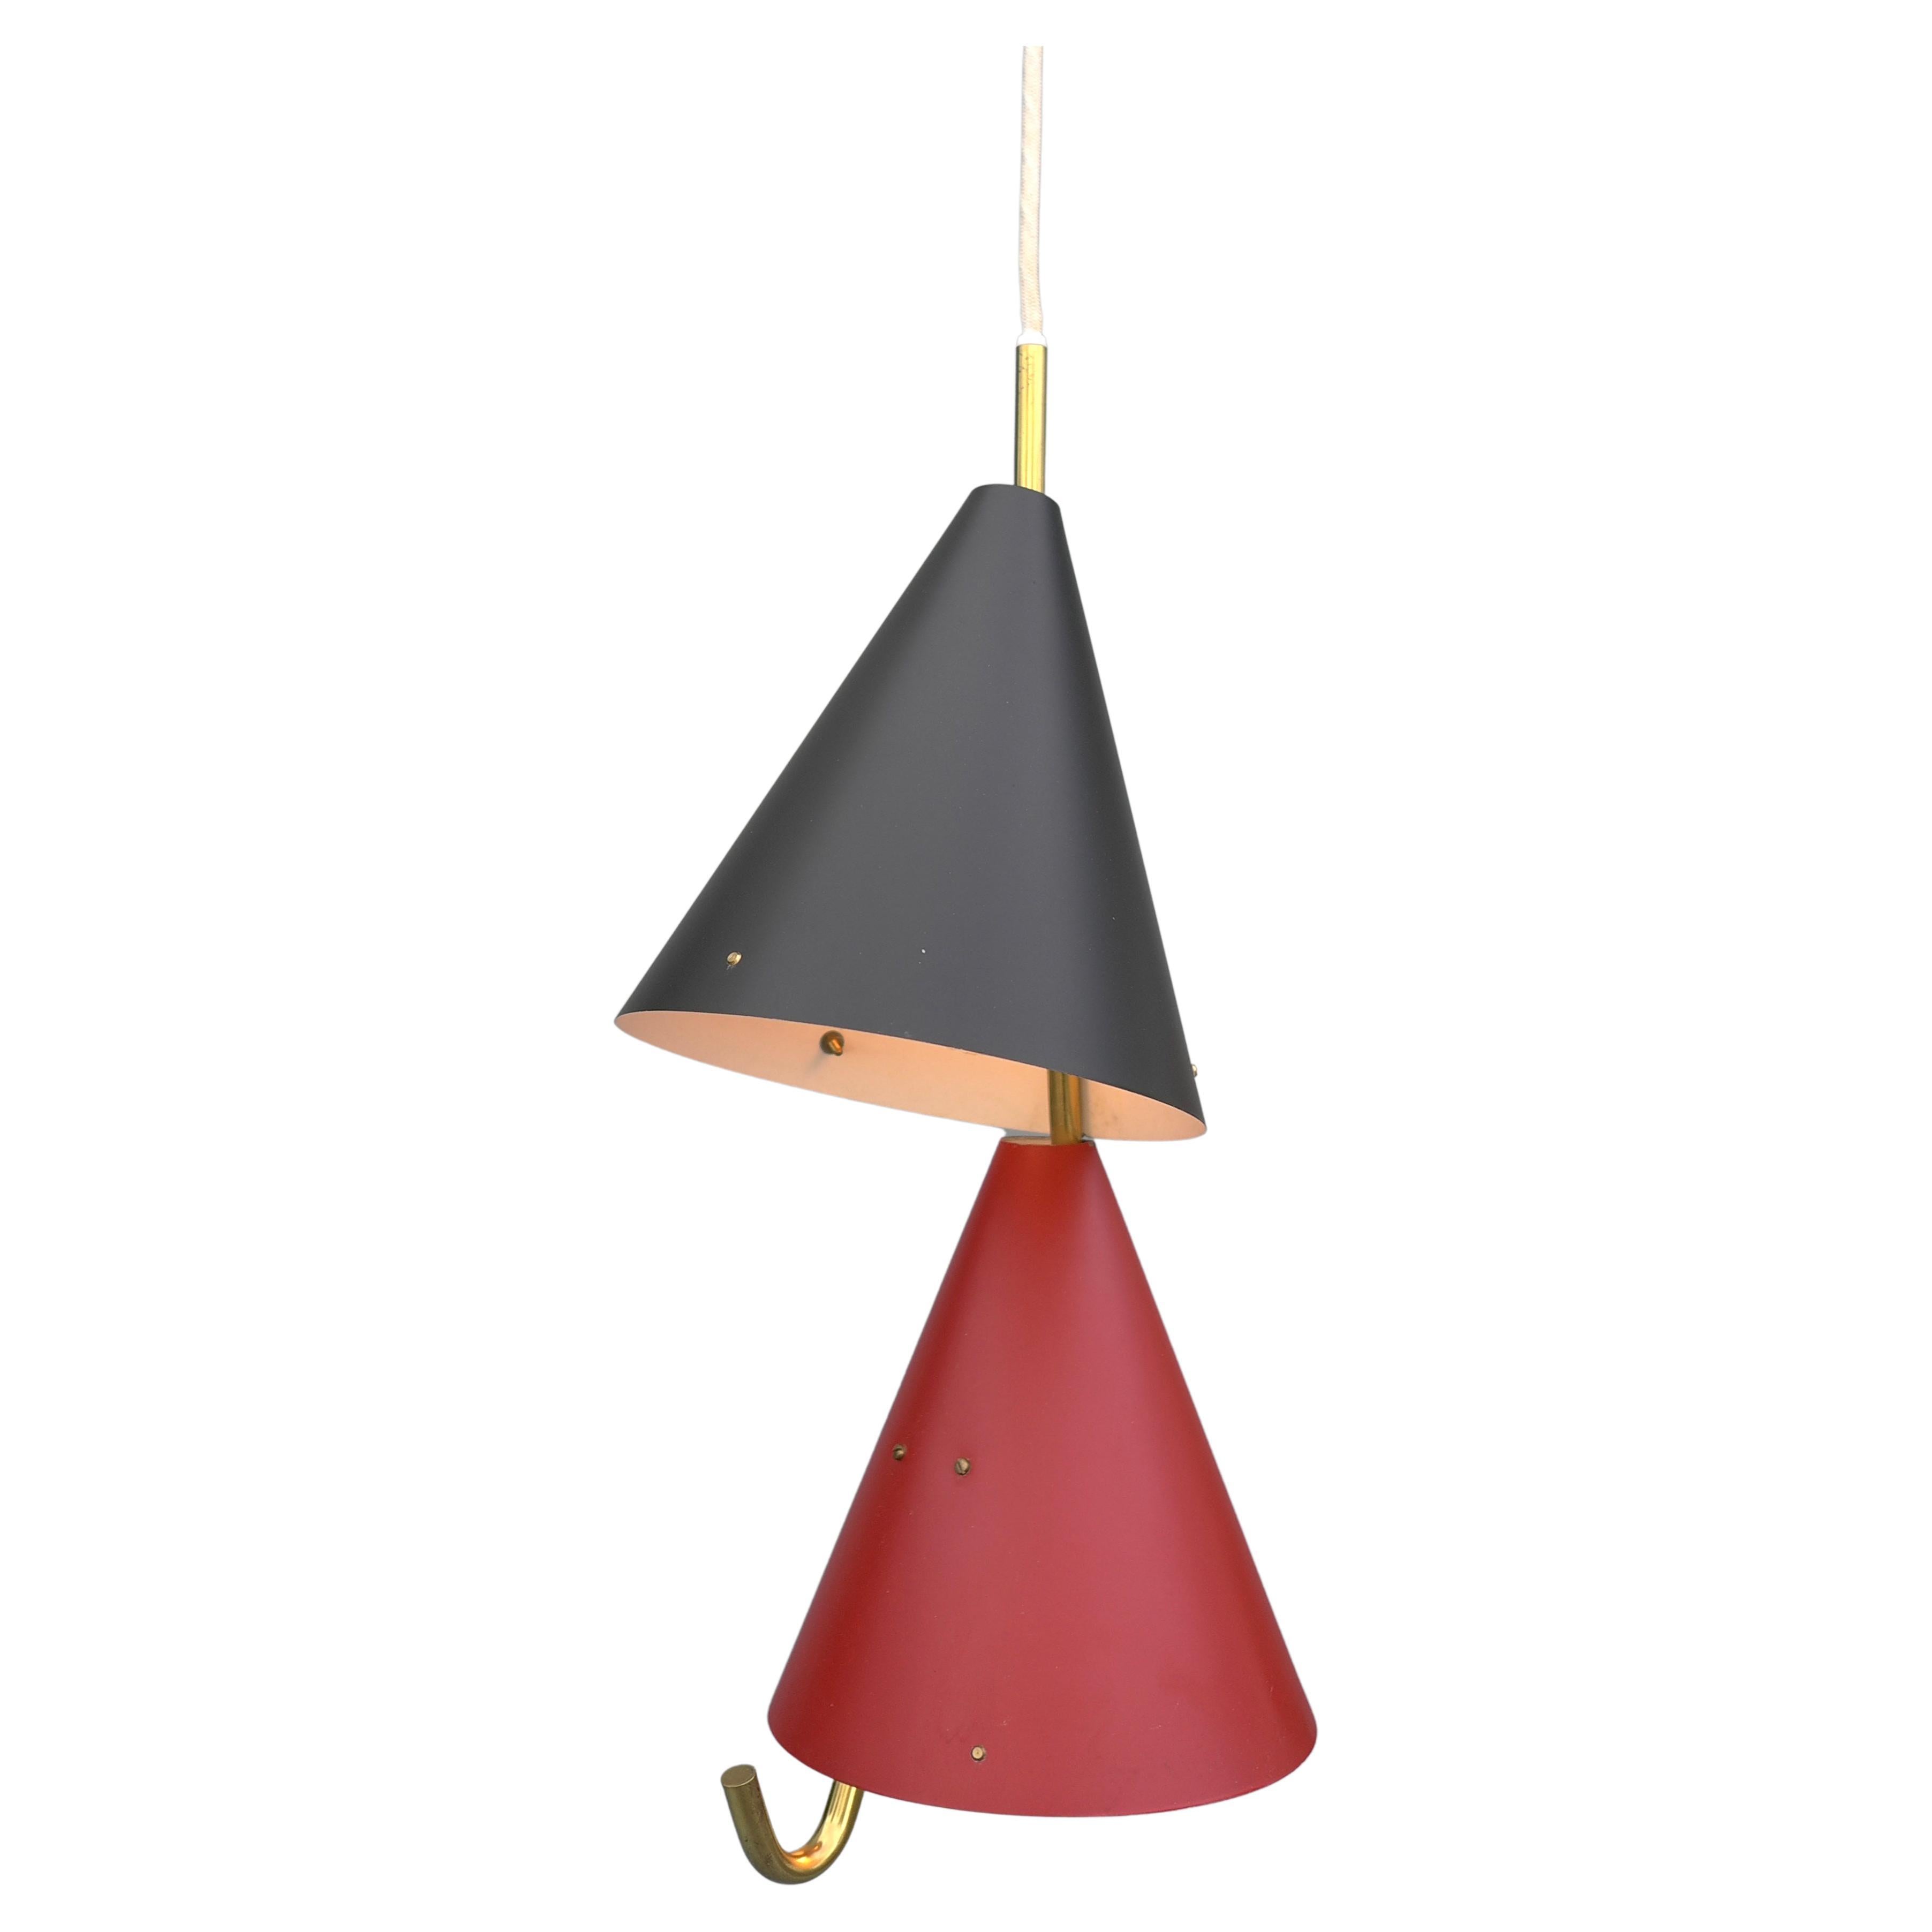 Bent Karlby Red and Black New Old Stock Lyfa Pendant Lamp, Denmark, 1955 For Sale